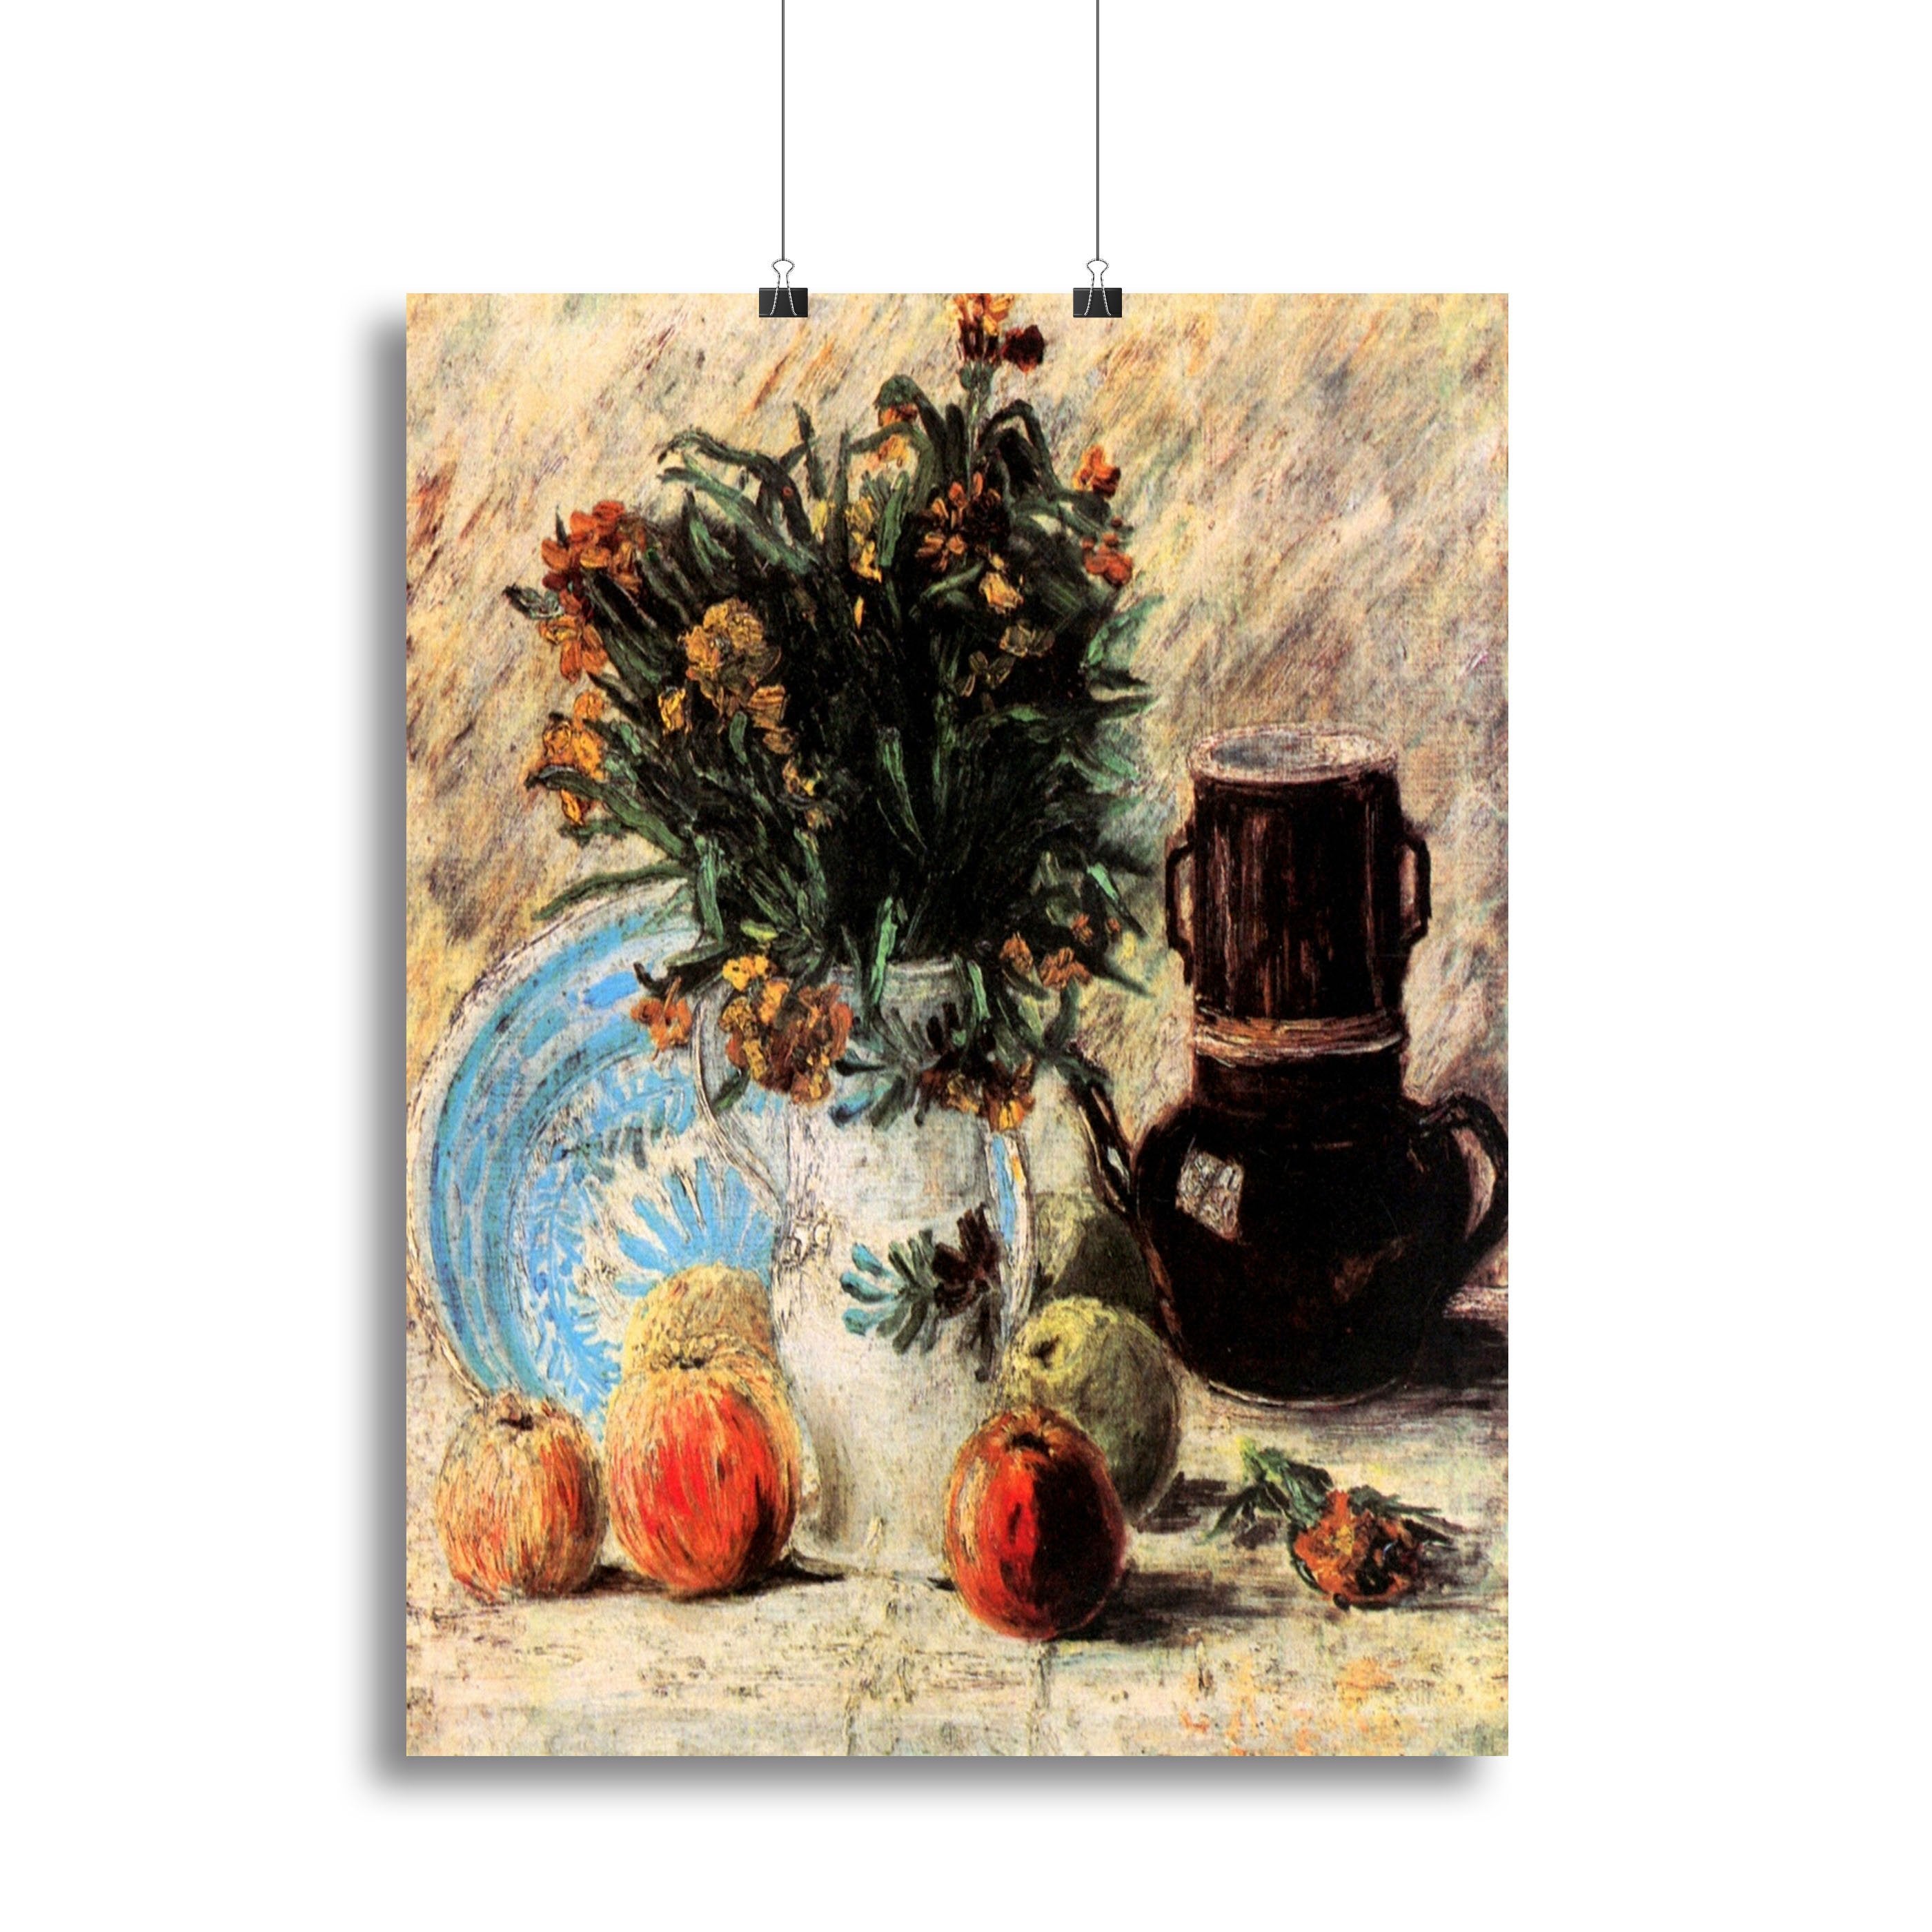 Vase with Flowers Coffeepot and Fruit by Van Gogh Canvas Print or Poster